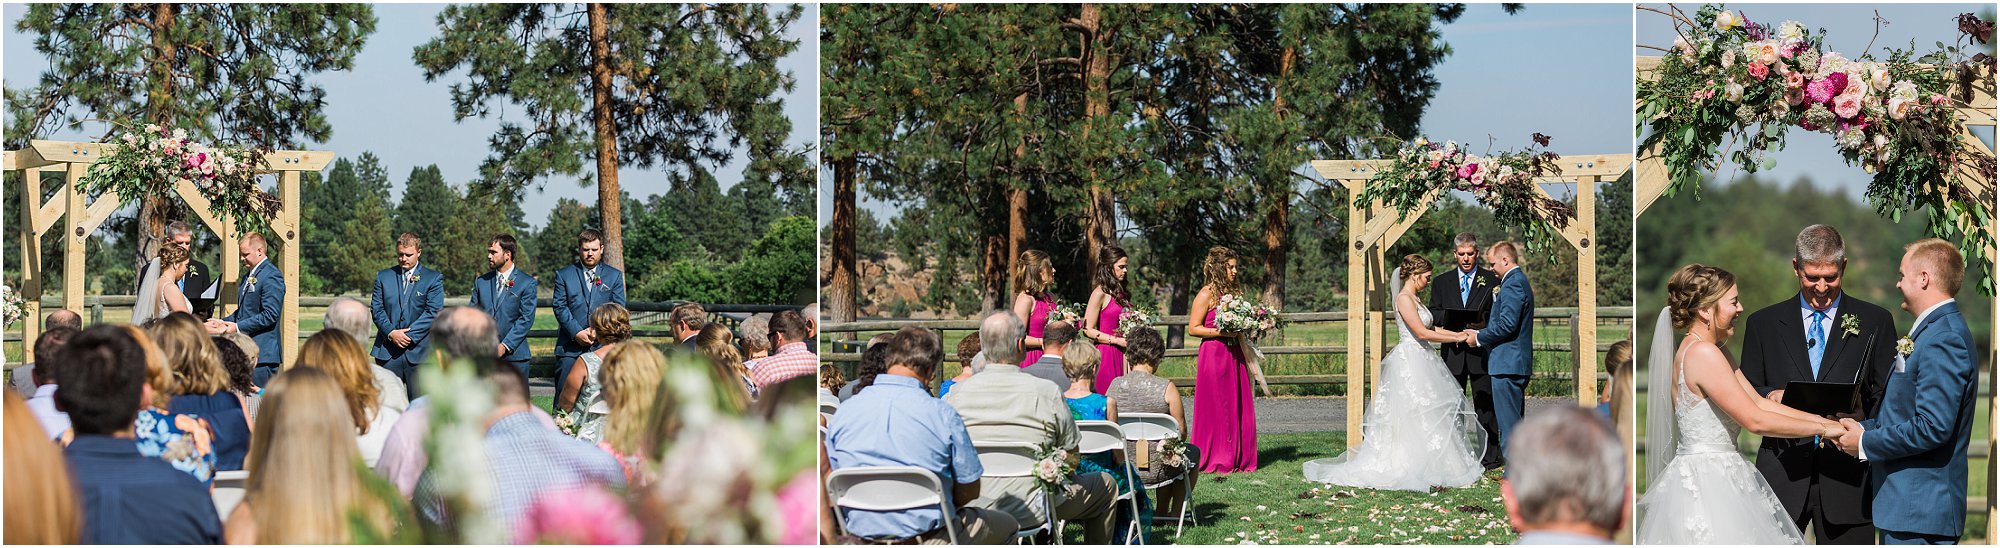 A gorgeous outdoor wedding ceremony on the lawn of the Rock Springs Ranch wedding venue in Central Oregon by Bend wedding photographer Erica Swantek Photography. 